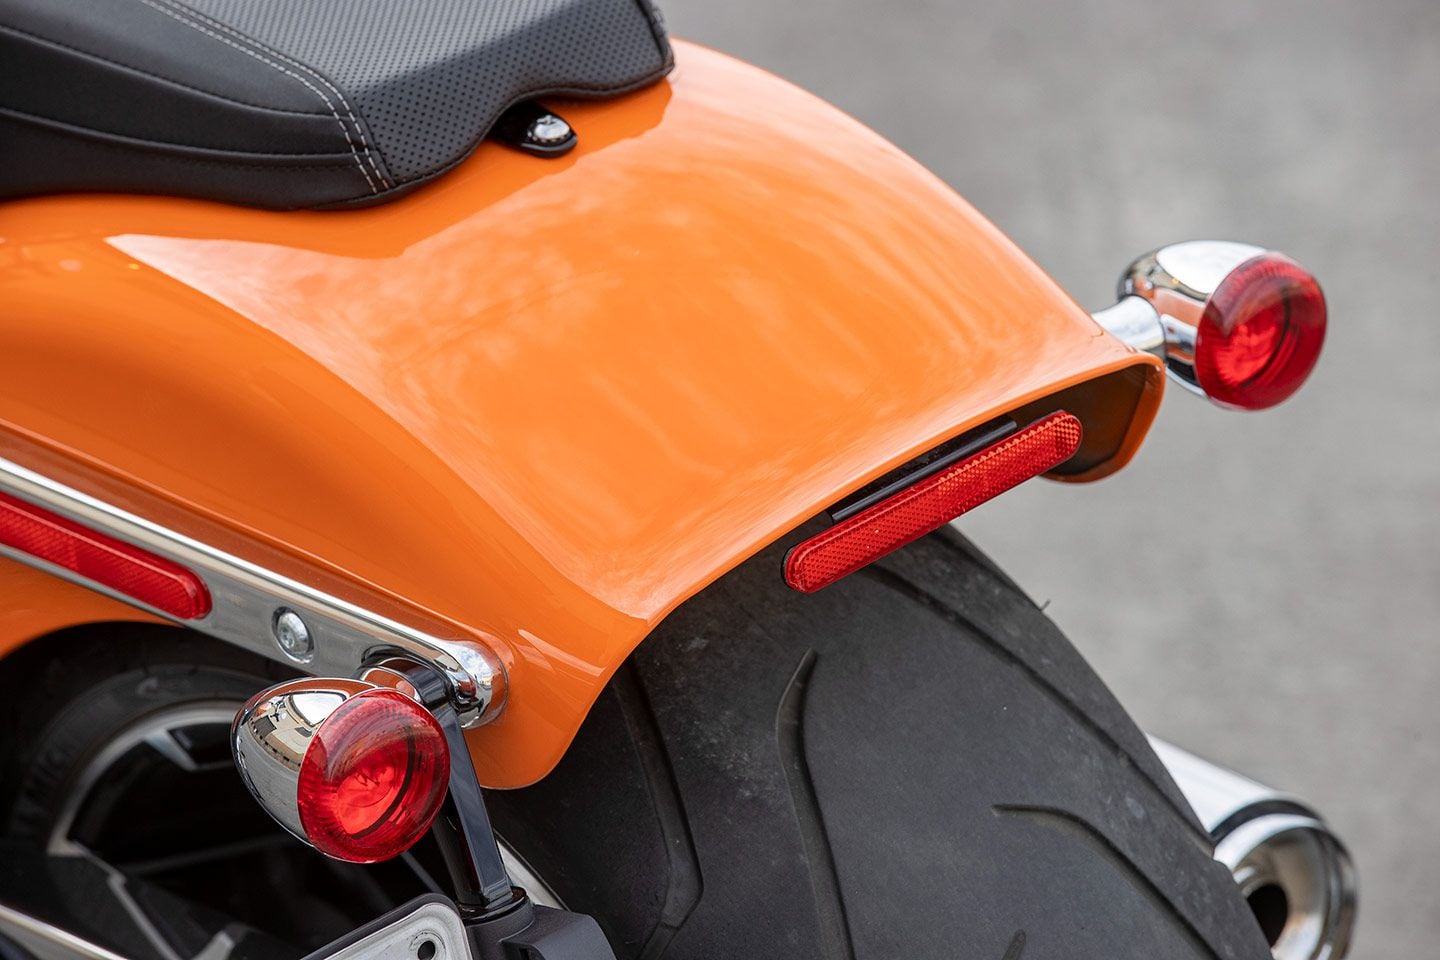 The clean bobbed rear fender features integrated turn signals and brake lights.